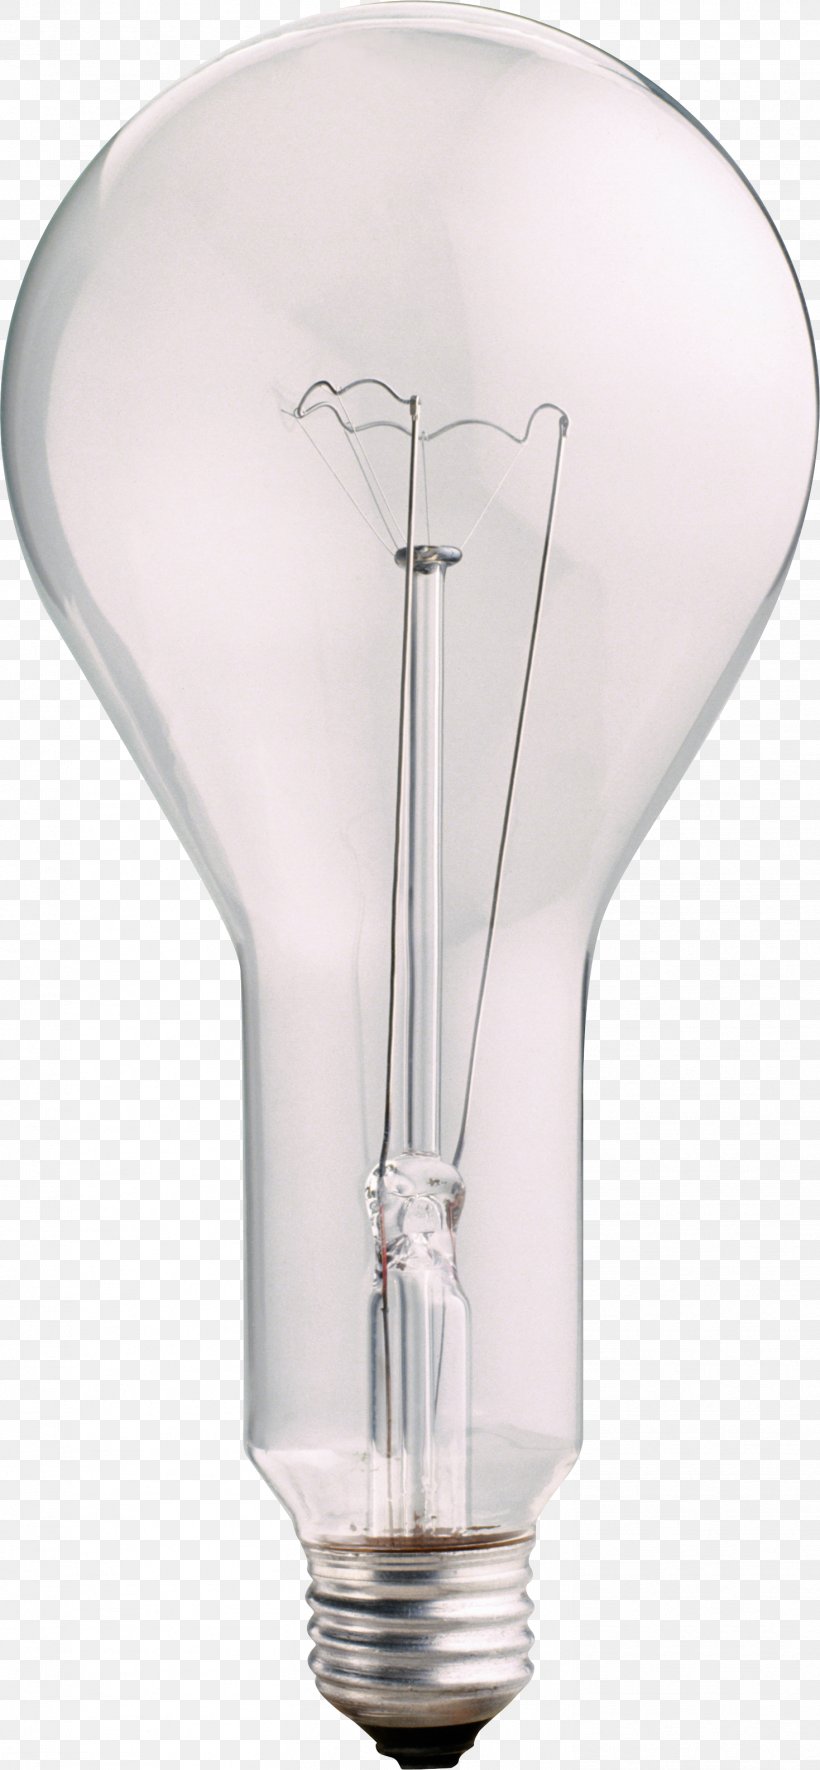 Incandescent Light Bulb Lamp Lighting, PNG, 1469x3171px, Light, Candlepower, Chandelier, Creativity, Electric Light Download Free